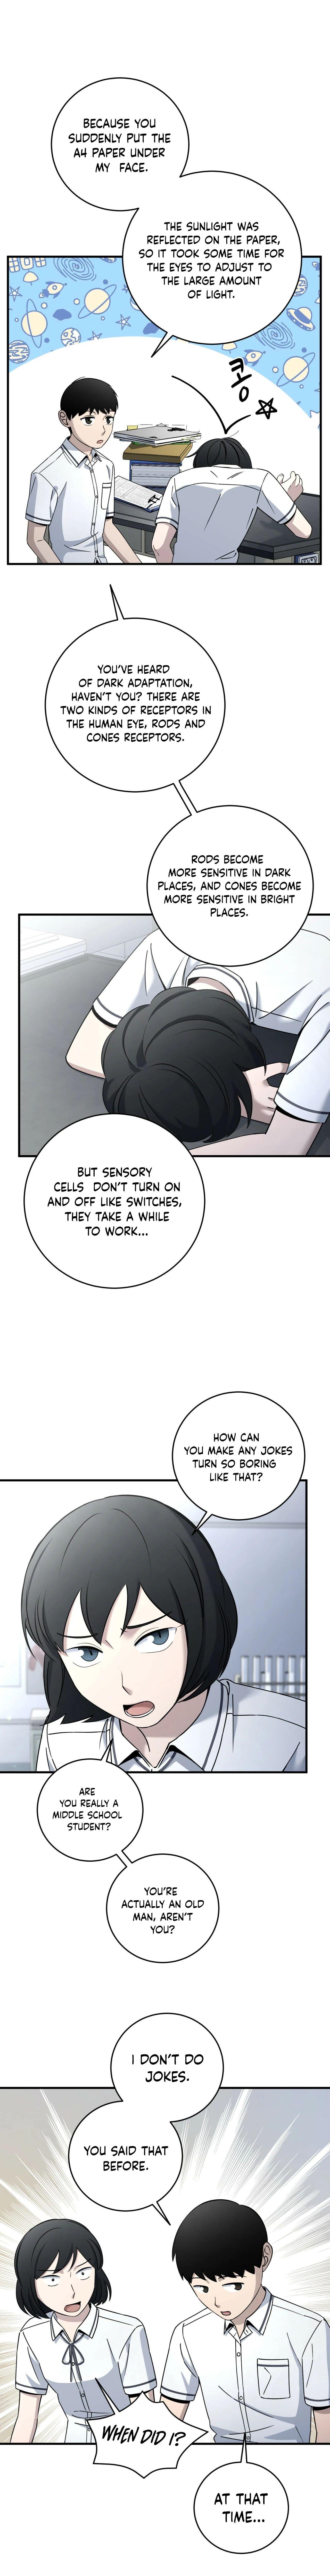 Thoughts on Cheolsu Saves the World? I don't see many people talking about  it : r/manhwa